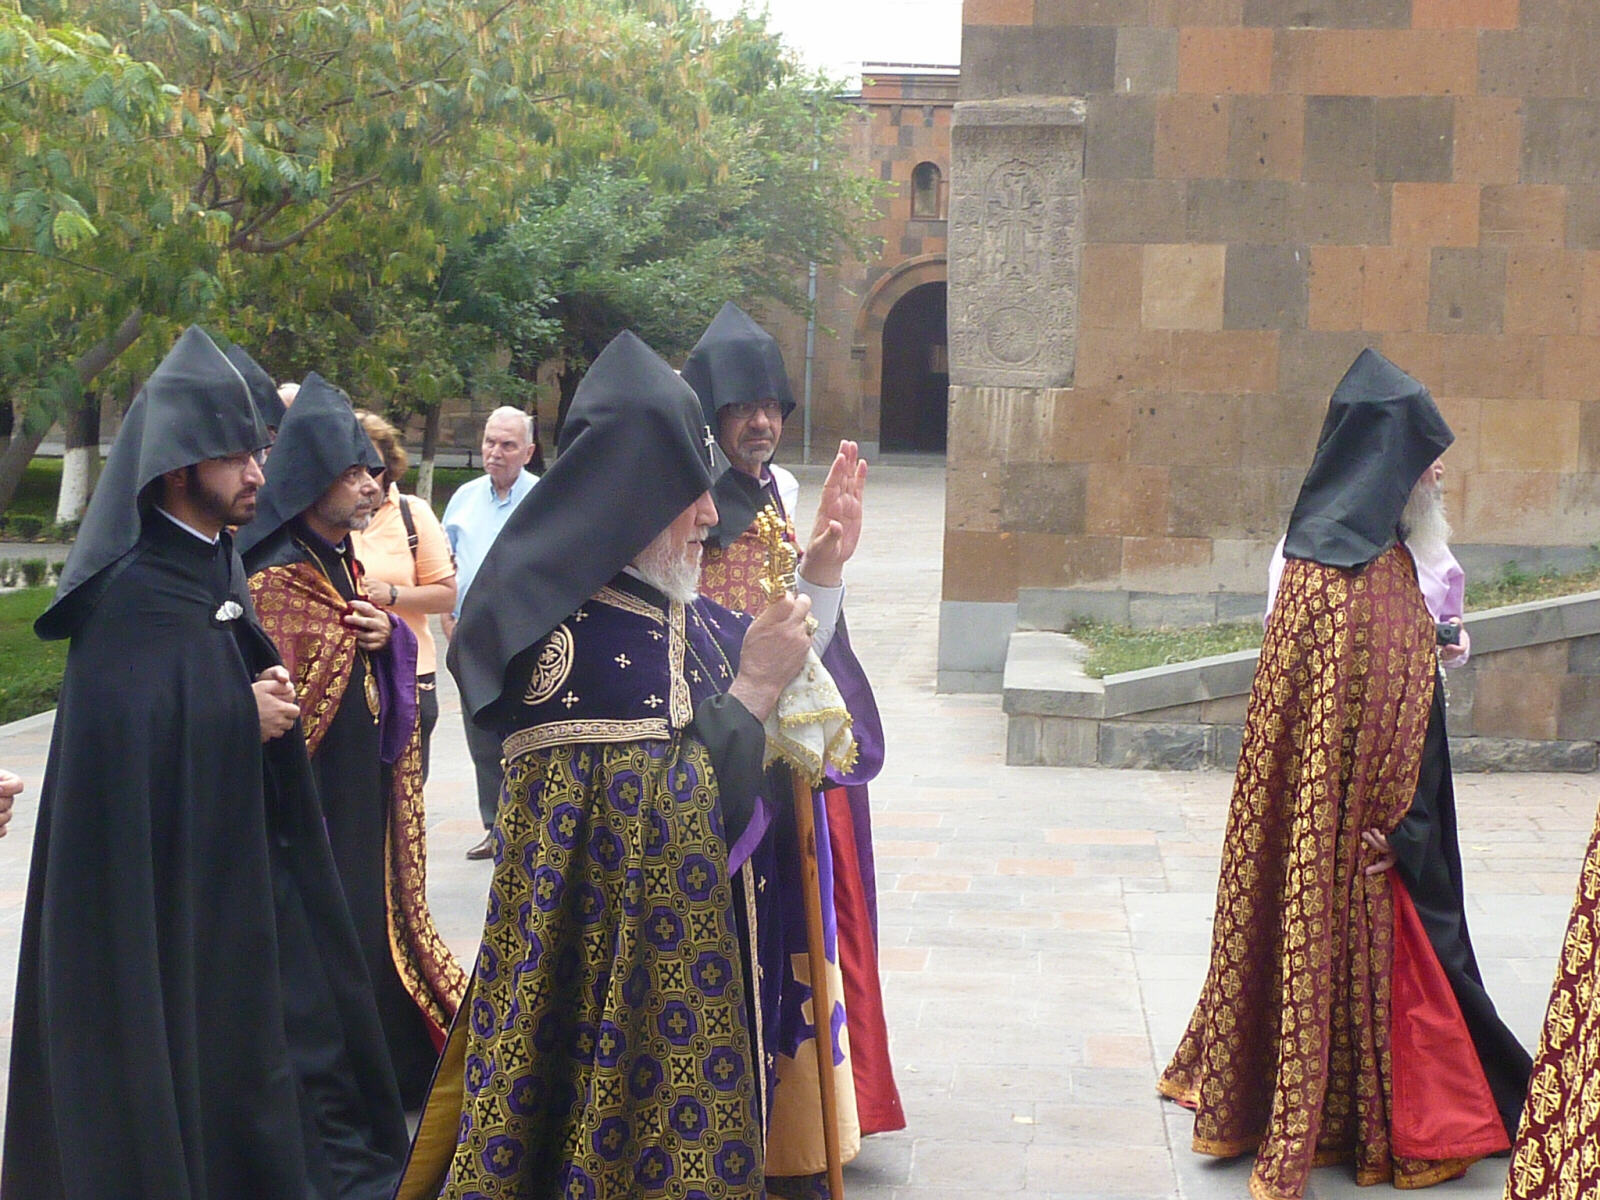 Priests blessing the crowds at Echmiadzin in Armenia